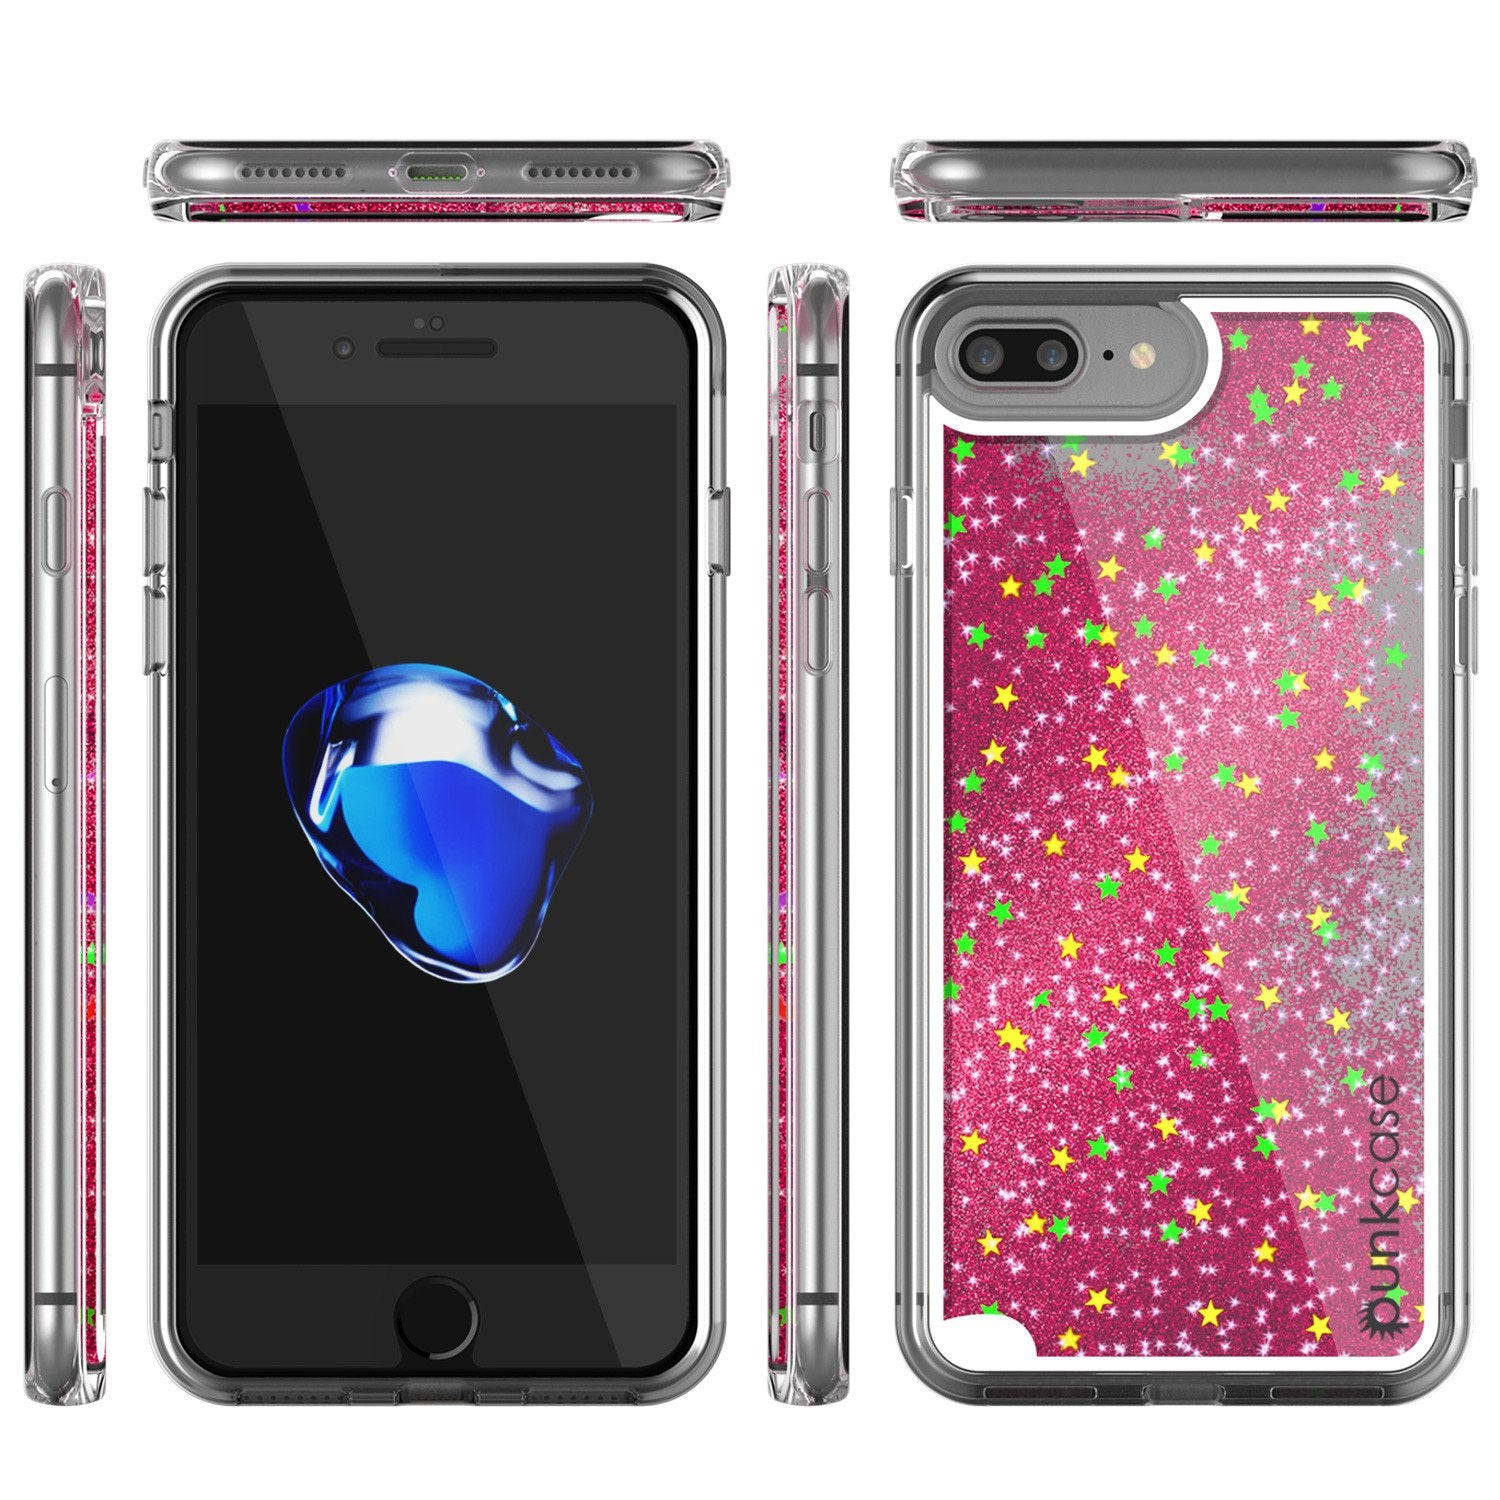 iPhone 7 Plus Case, Punkcase [Liquid Pink Series] Protective Dual Layer Floating Glitter Cover with lots of Bling & Sparkle + 0.3mm Tempered Glass Screen Protector for Apple iPhone 7s Plus